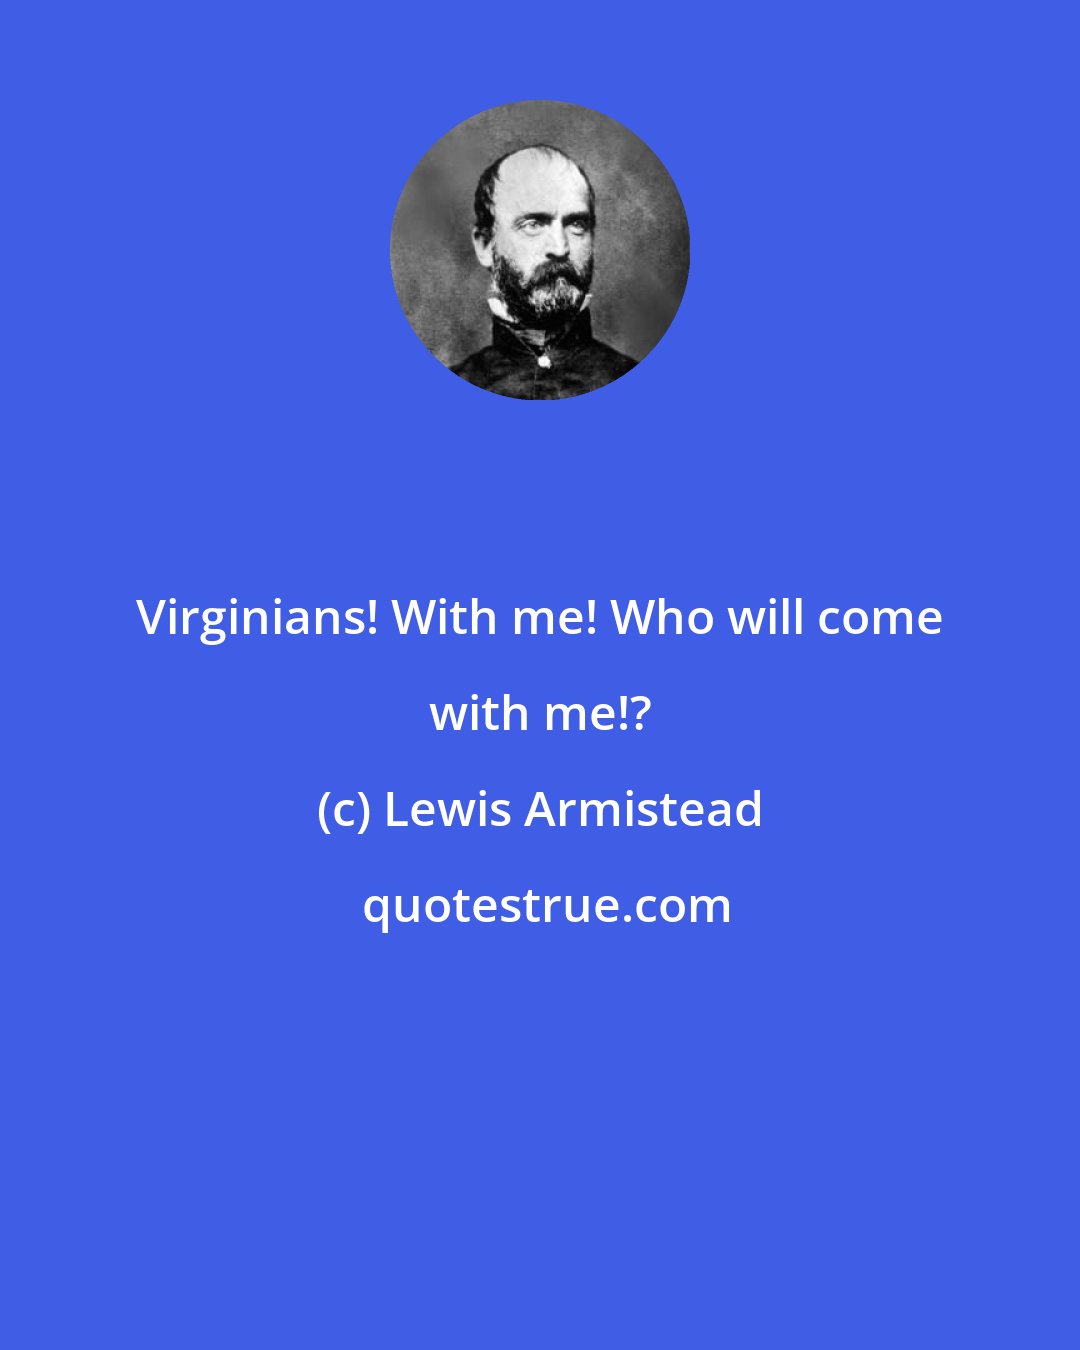 Lewis Armistead: Virginians! With me! Who will come with me!?